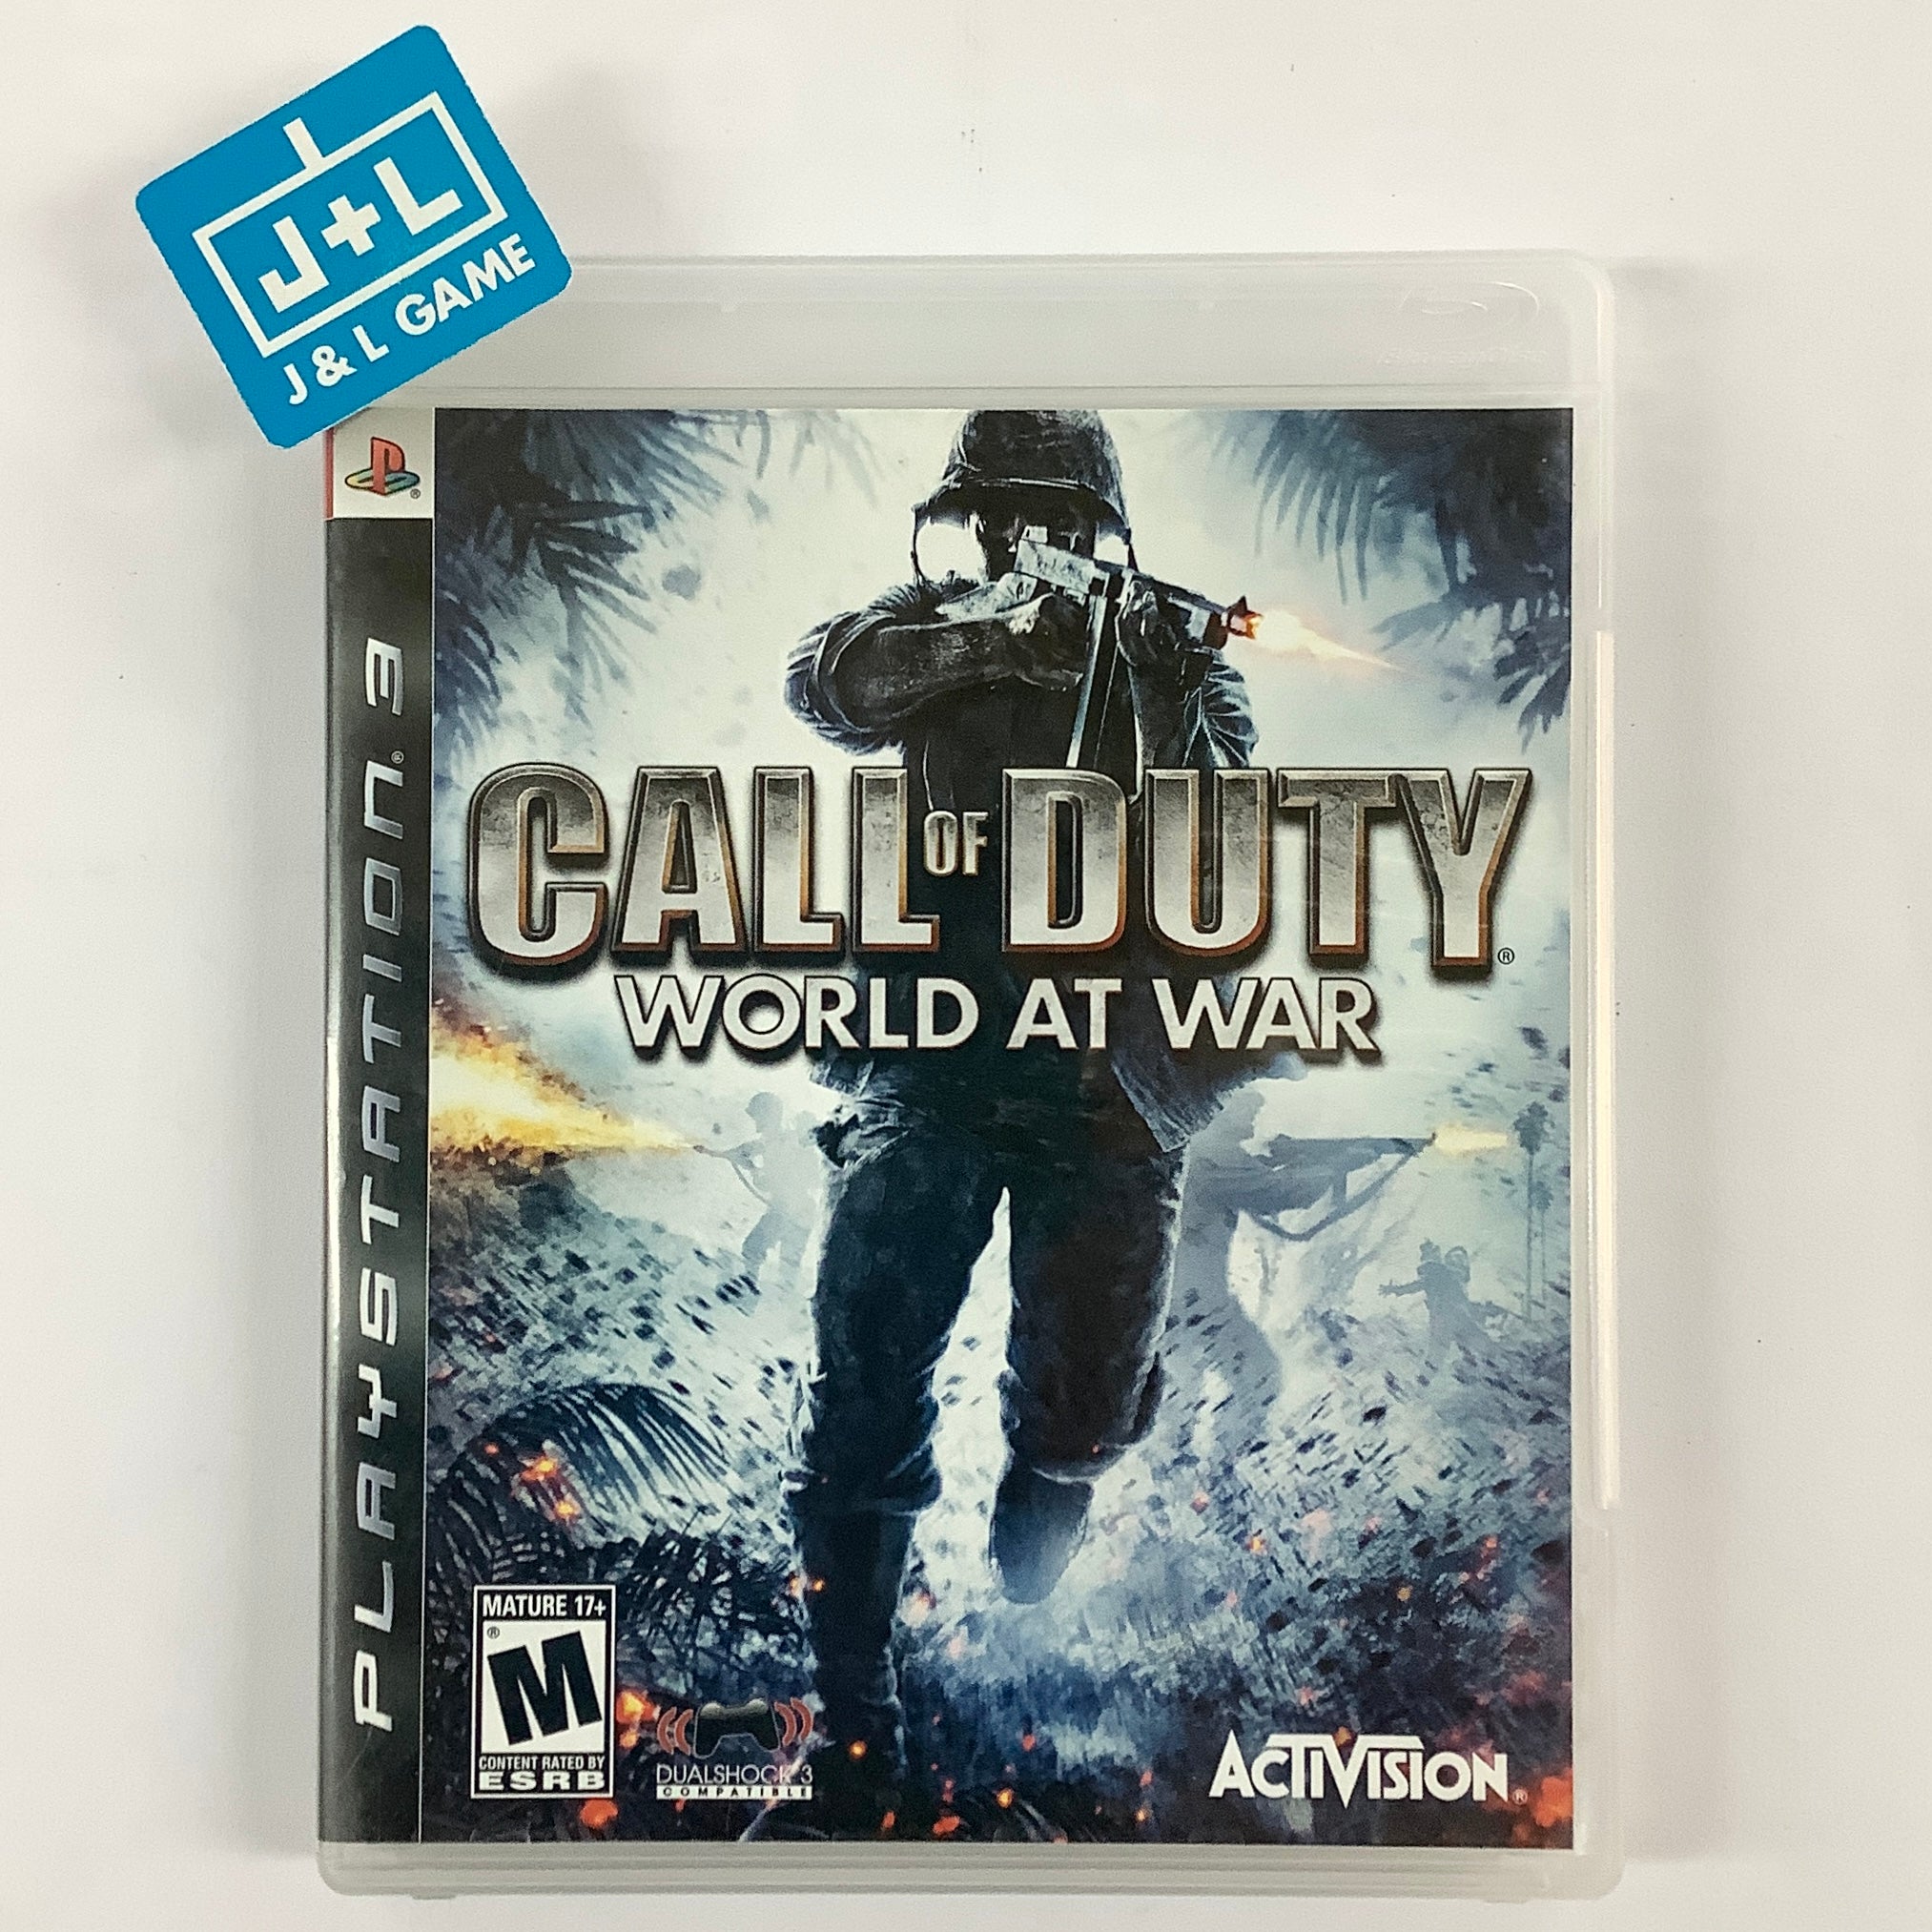 CALL OF DUTY WORLD AT WAR PS3 GAME WWII COMBAT SHOOTER ACTION ADVENTURE  COMPLETE